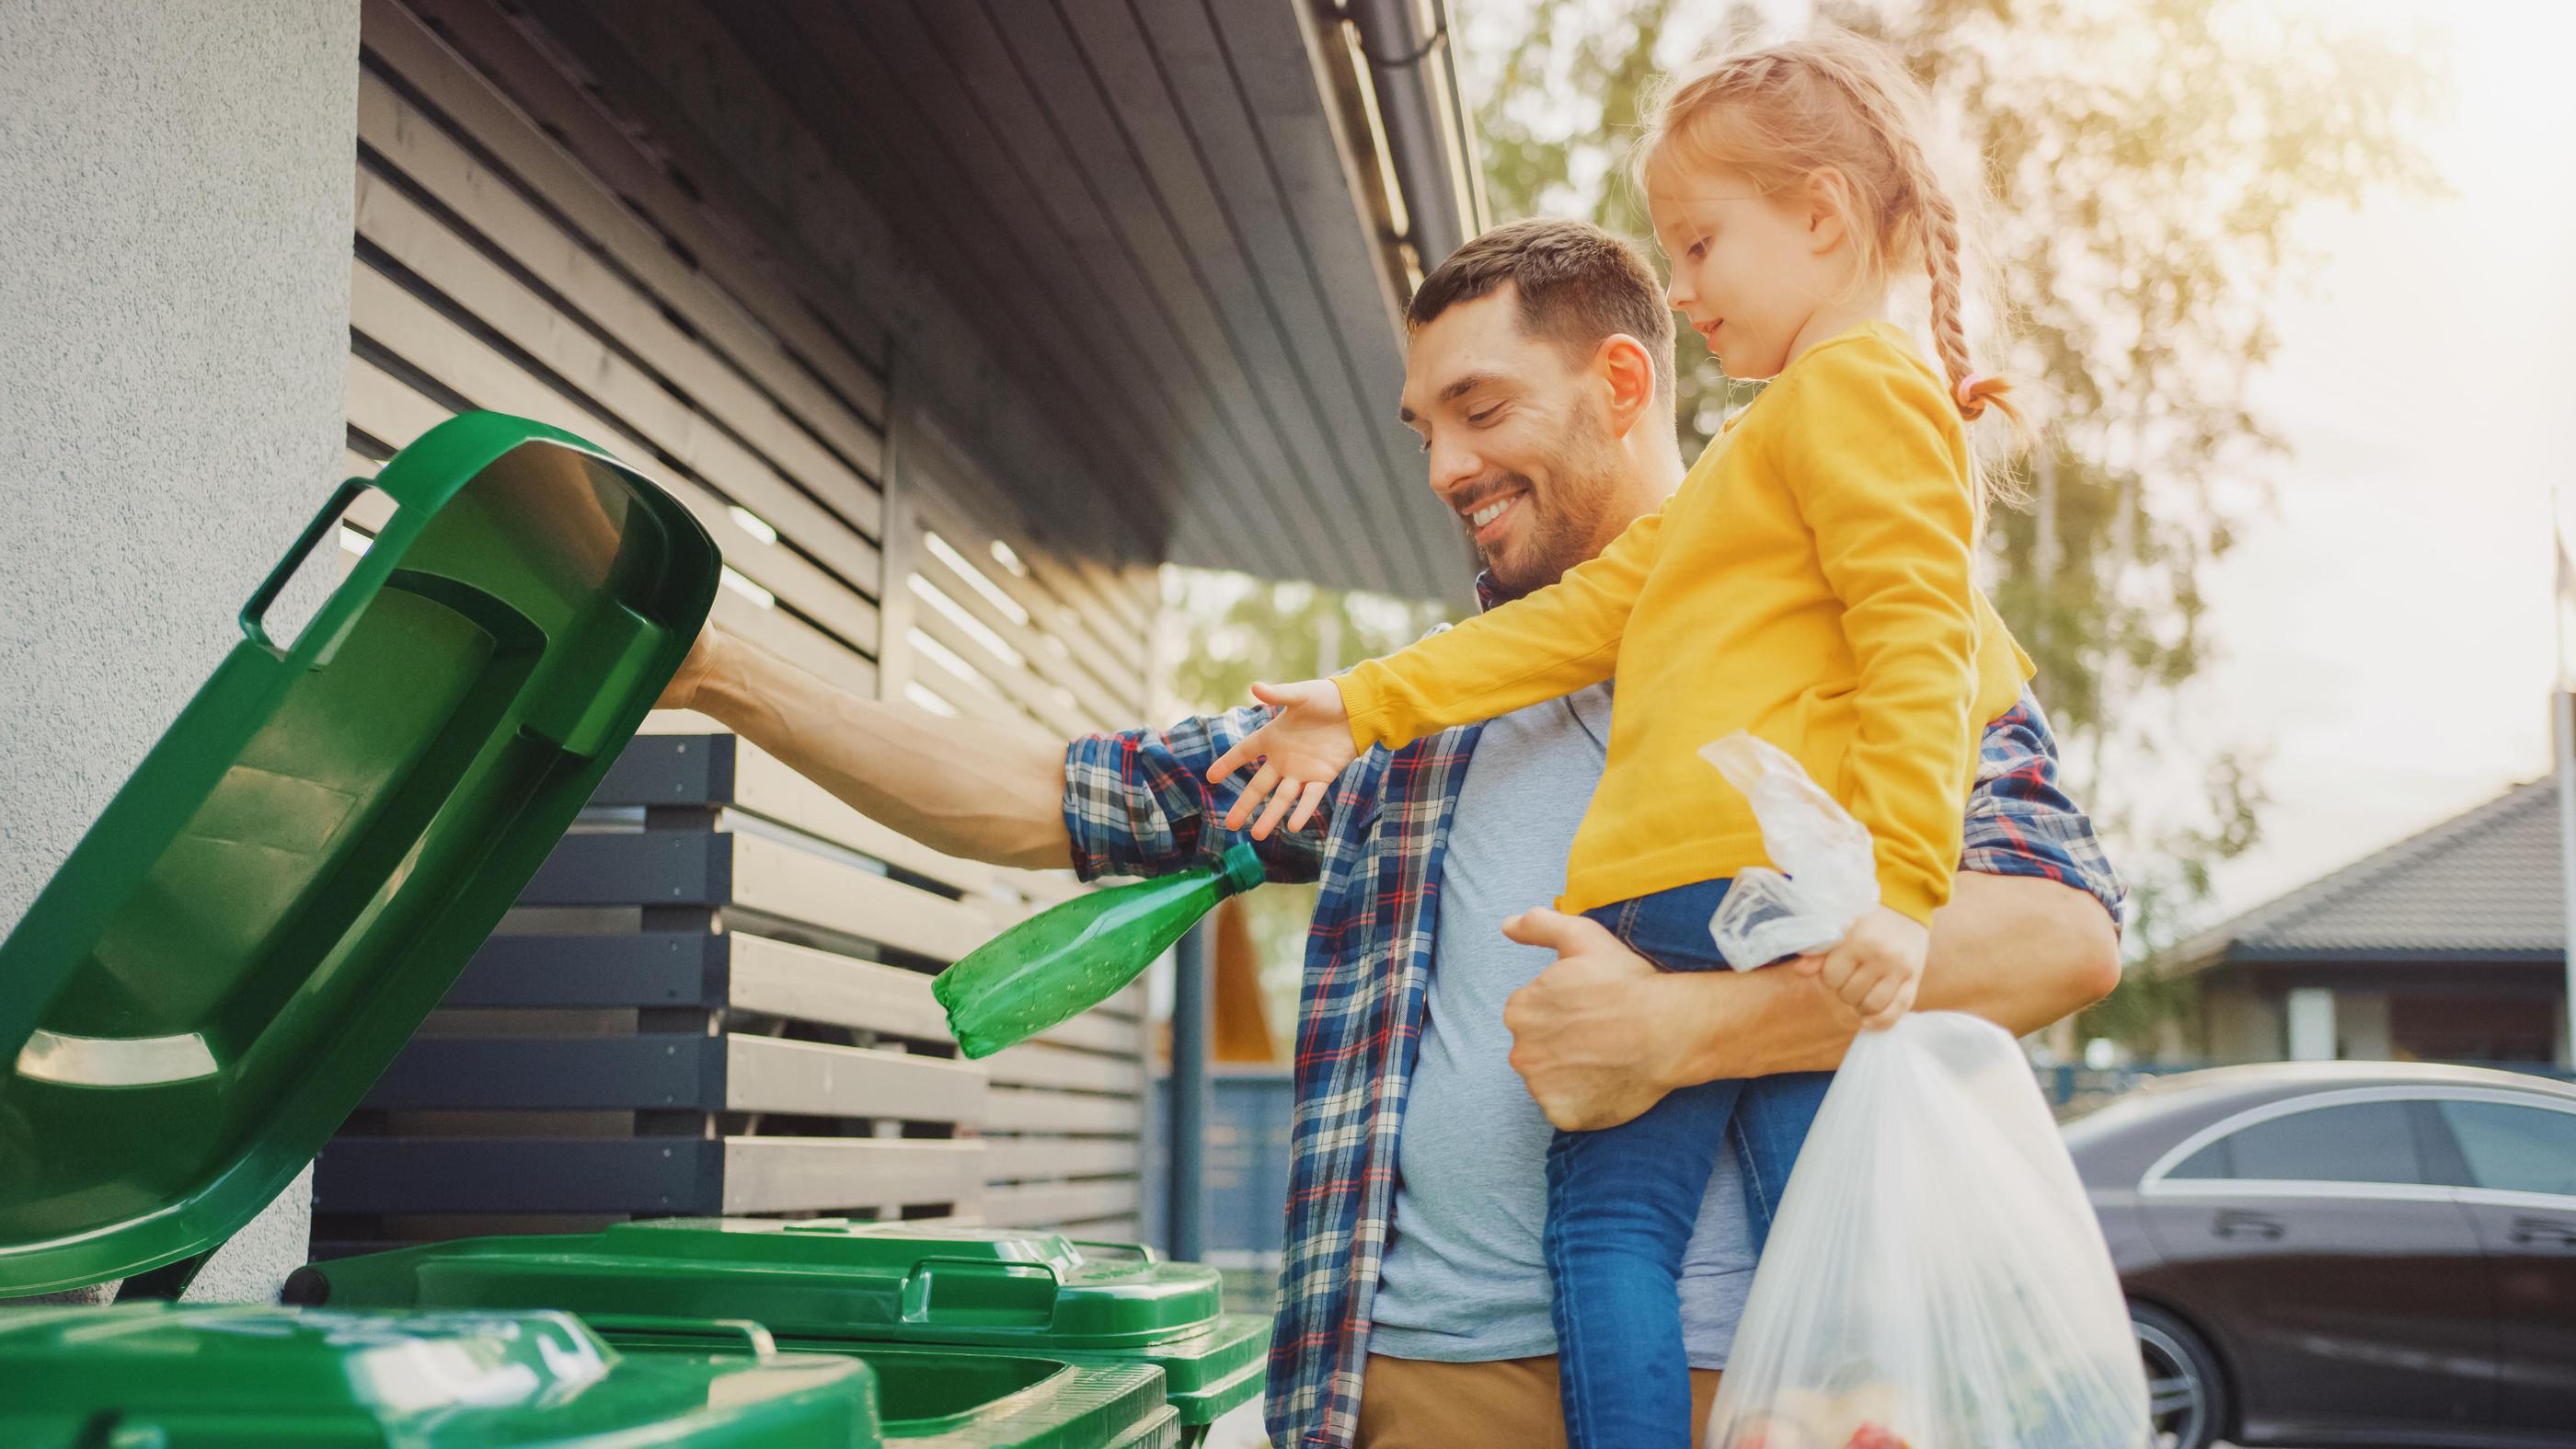 5 Things You Should be Recycling But Probably Aren't